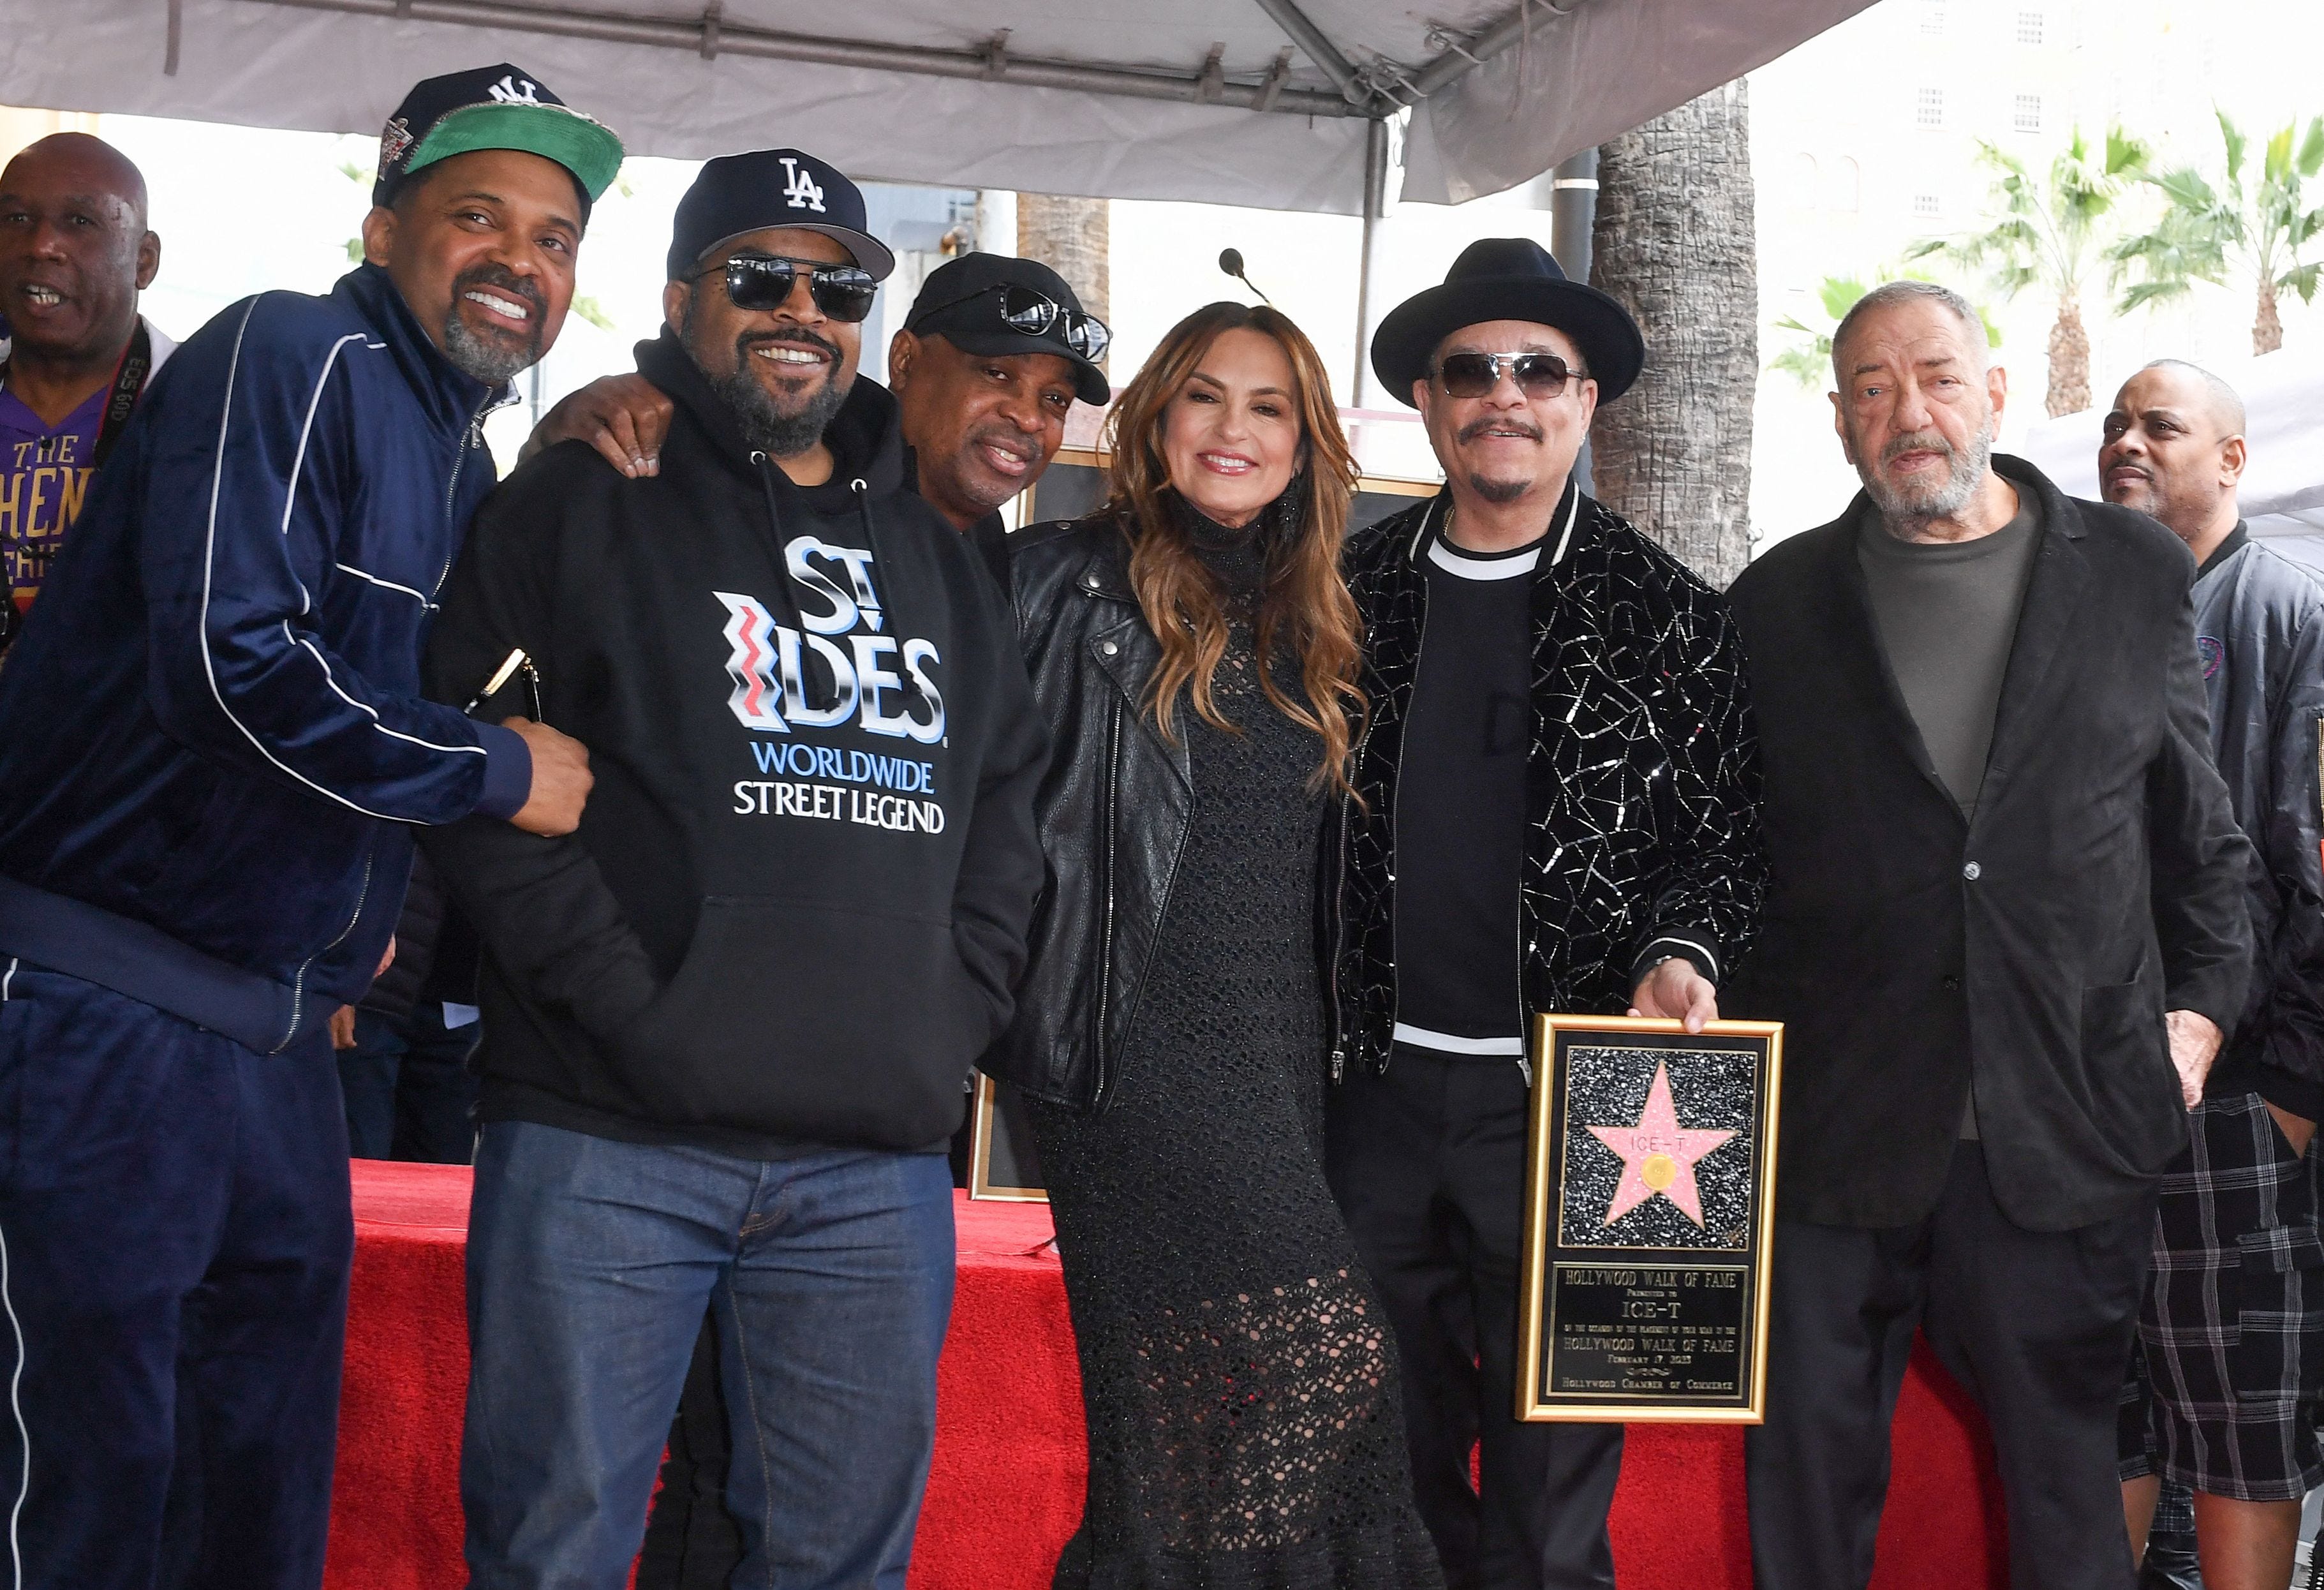 A bunch of special guests came to support Ice-T including Mike Epps, Ice Cube, Chuck D, Mariska Hargitay and producer Dick Wolf.